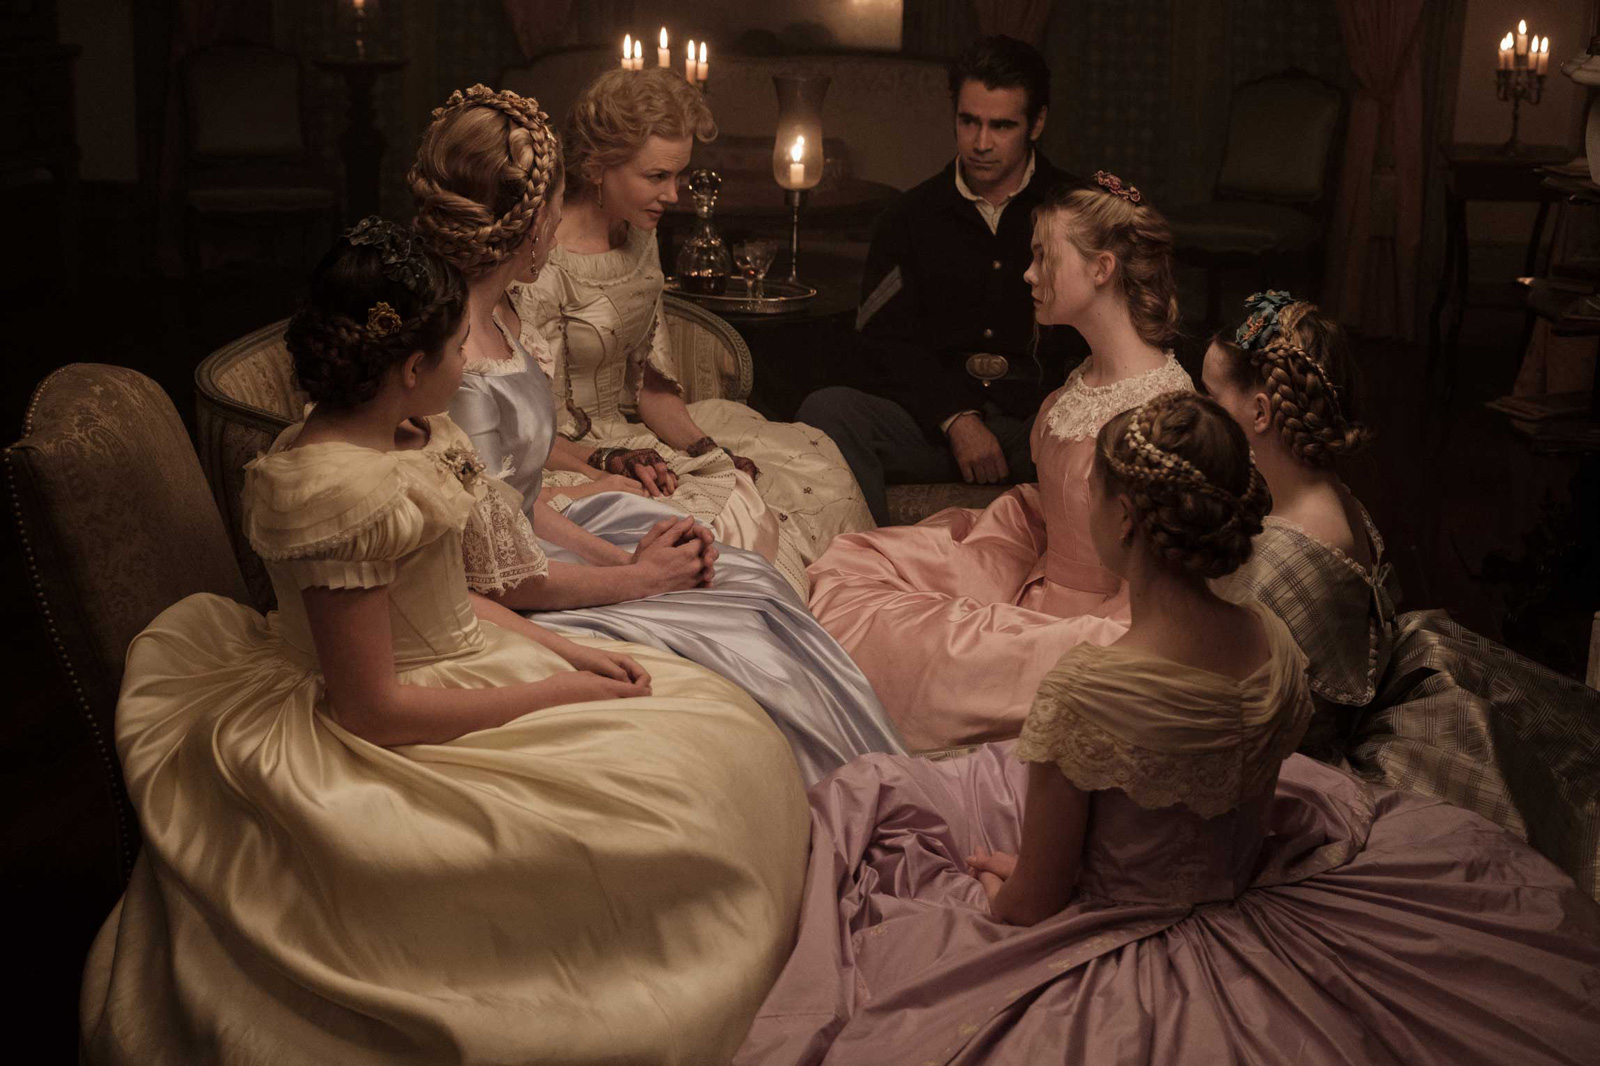 Nicole Kidman as Miss Martha, Colin Farrell as Corporal McBurney, Elle Fanning as Alicia, and others in Sofia Coppola's The Beguiled, 2017